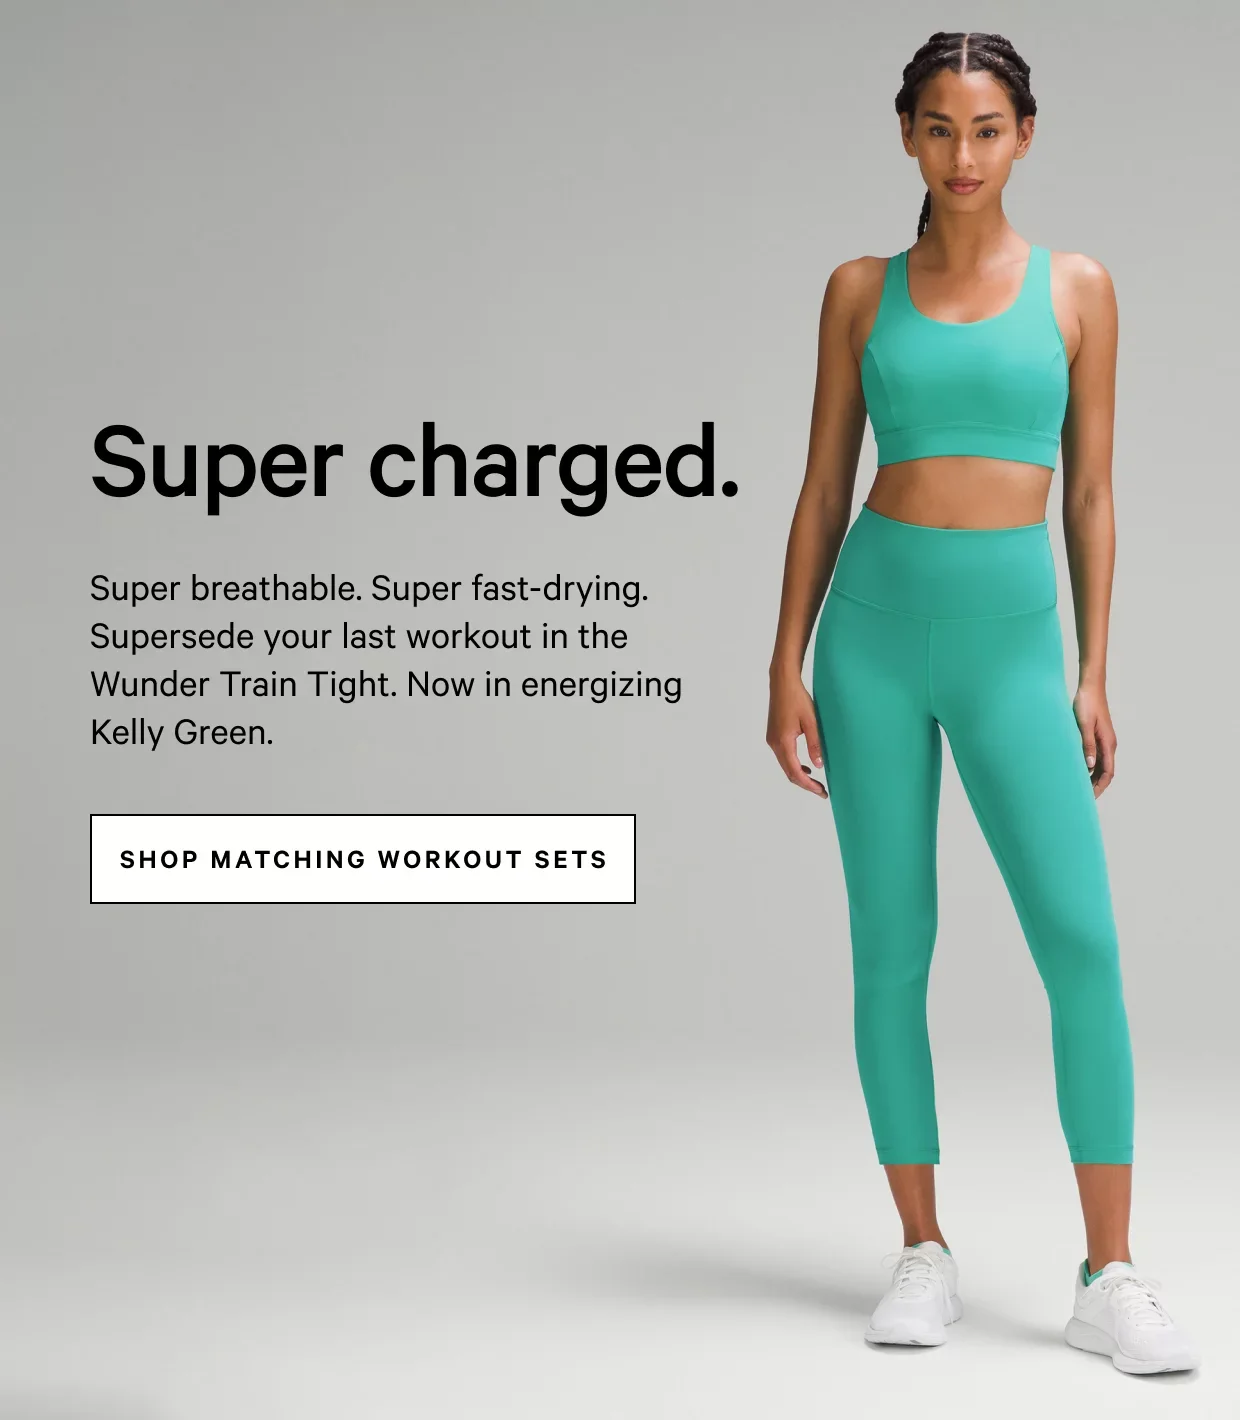 lululemon: Gear, now even greener on this side